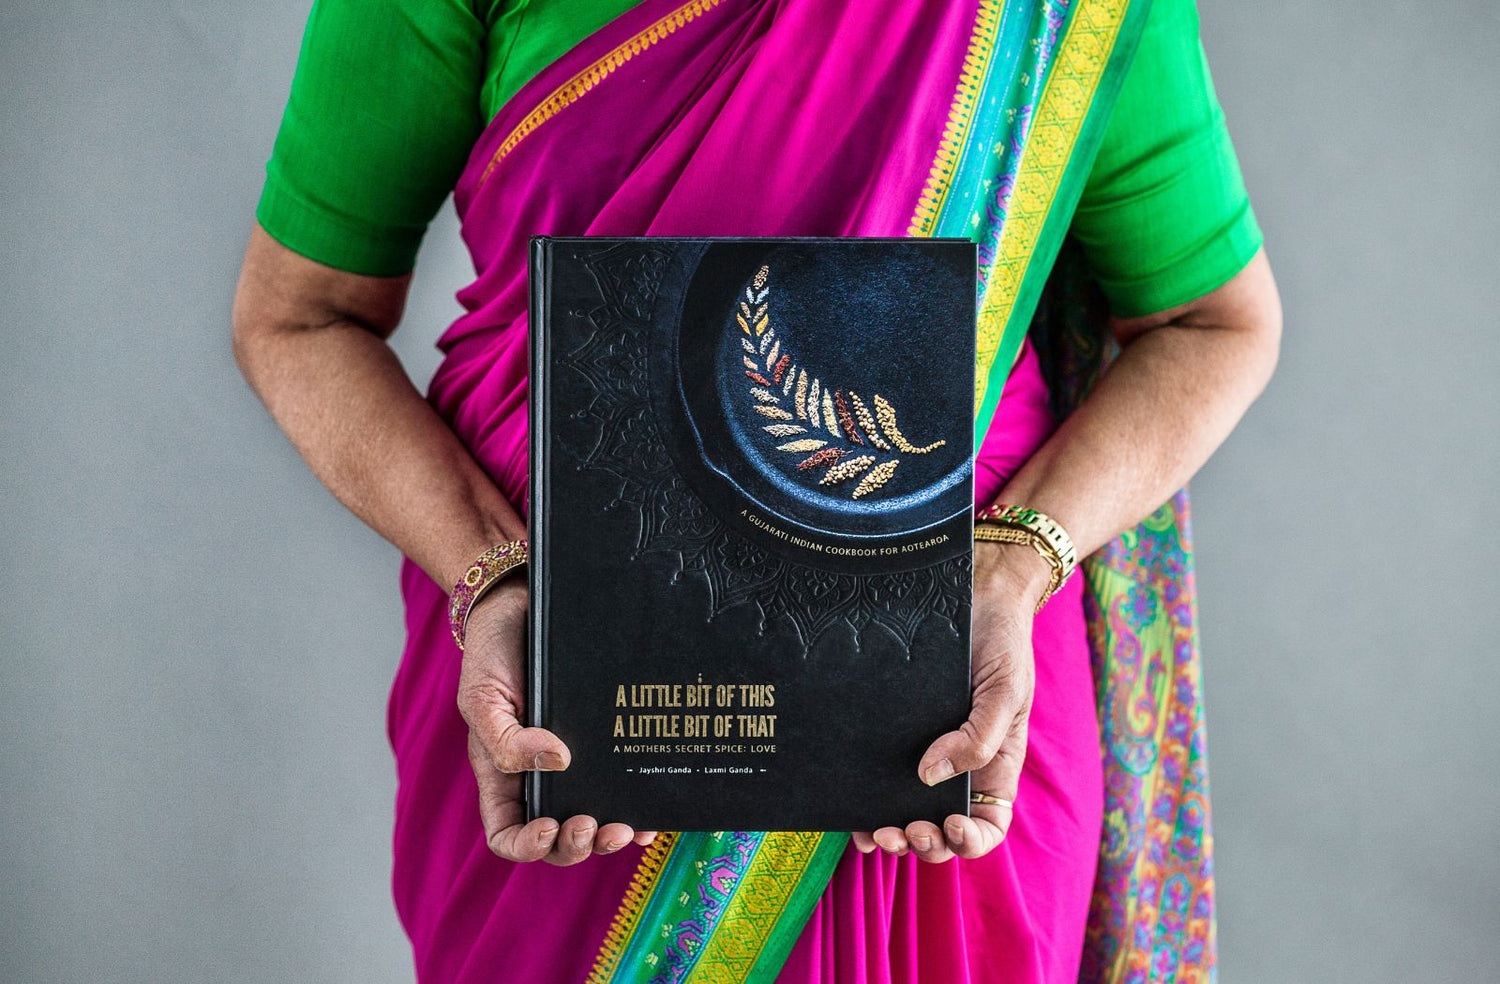 A family cookbook created by a Gujarati family who wanted to ensure their recipes weren't lost throughout the years. Meat recipes are included and a masala style kheemo pie, ghosht gujarate style and shaak along with hot rolti 